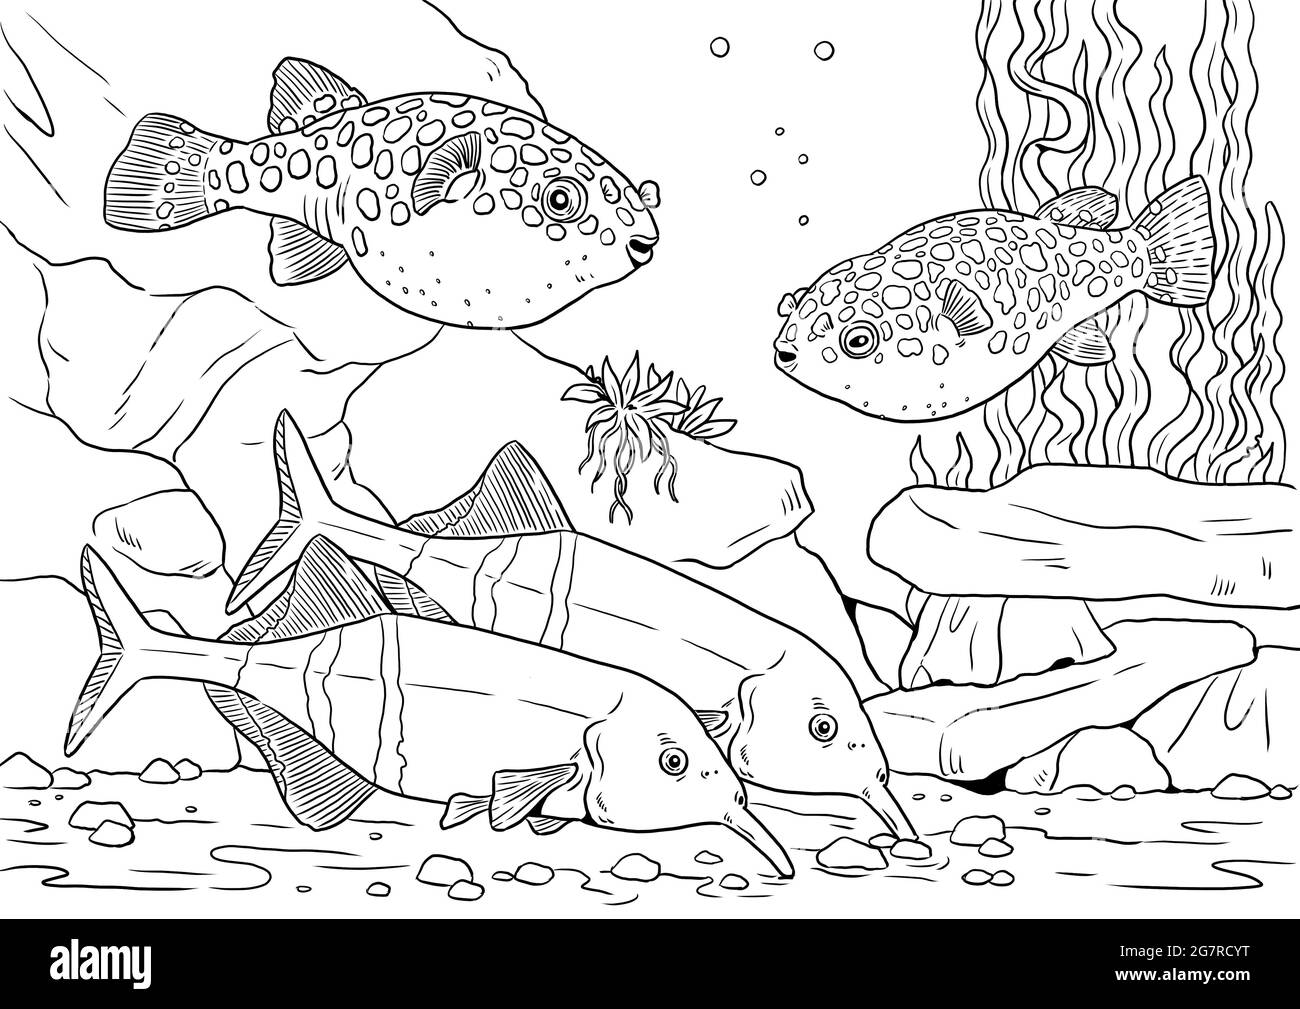 Aquarium with tetraodon and elephantnose fish for coloring. Colorful tropical fish templates. Coloring book for children and adults. Stock Photo